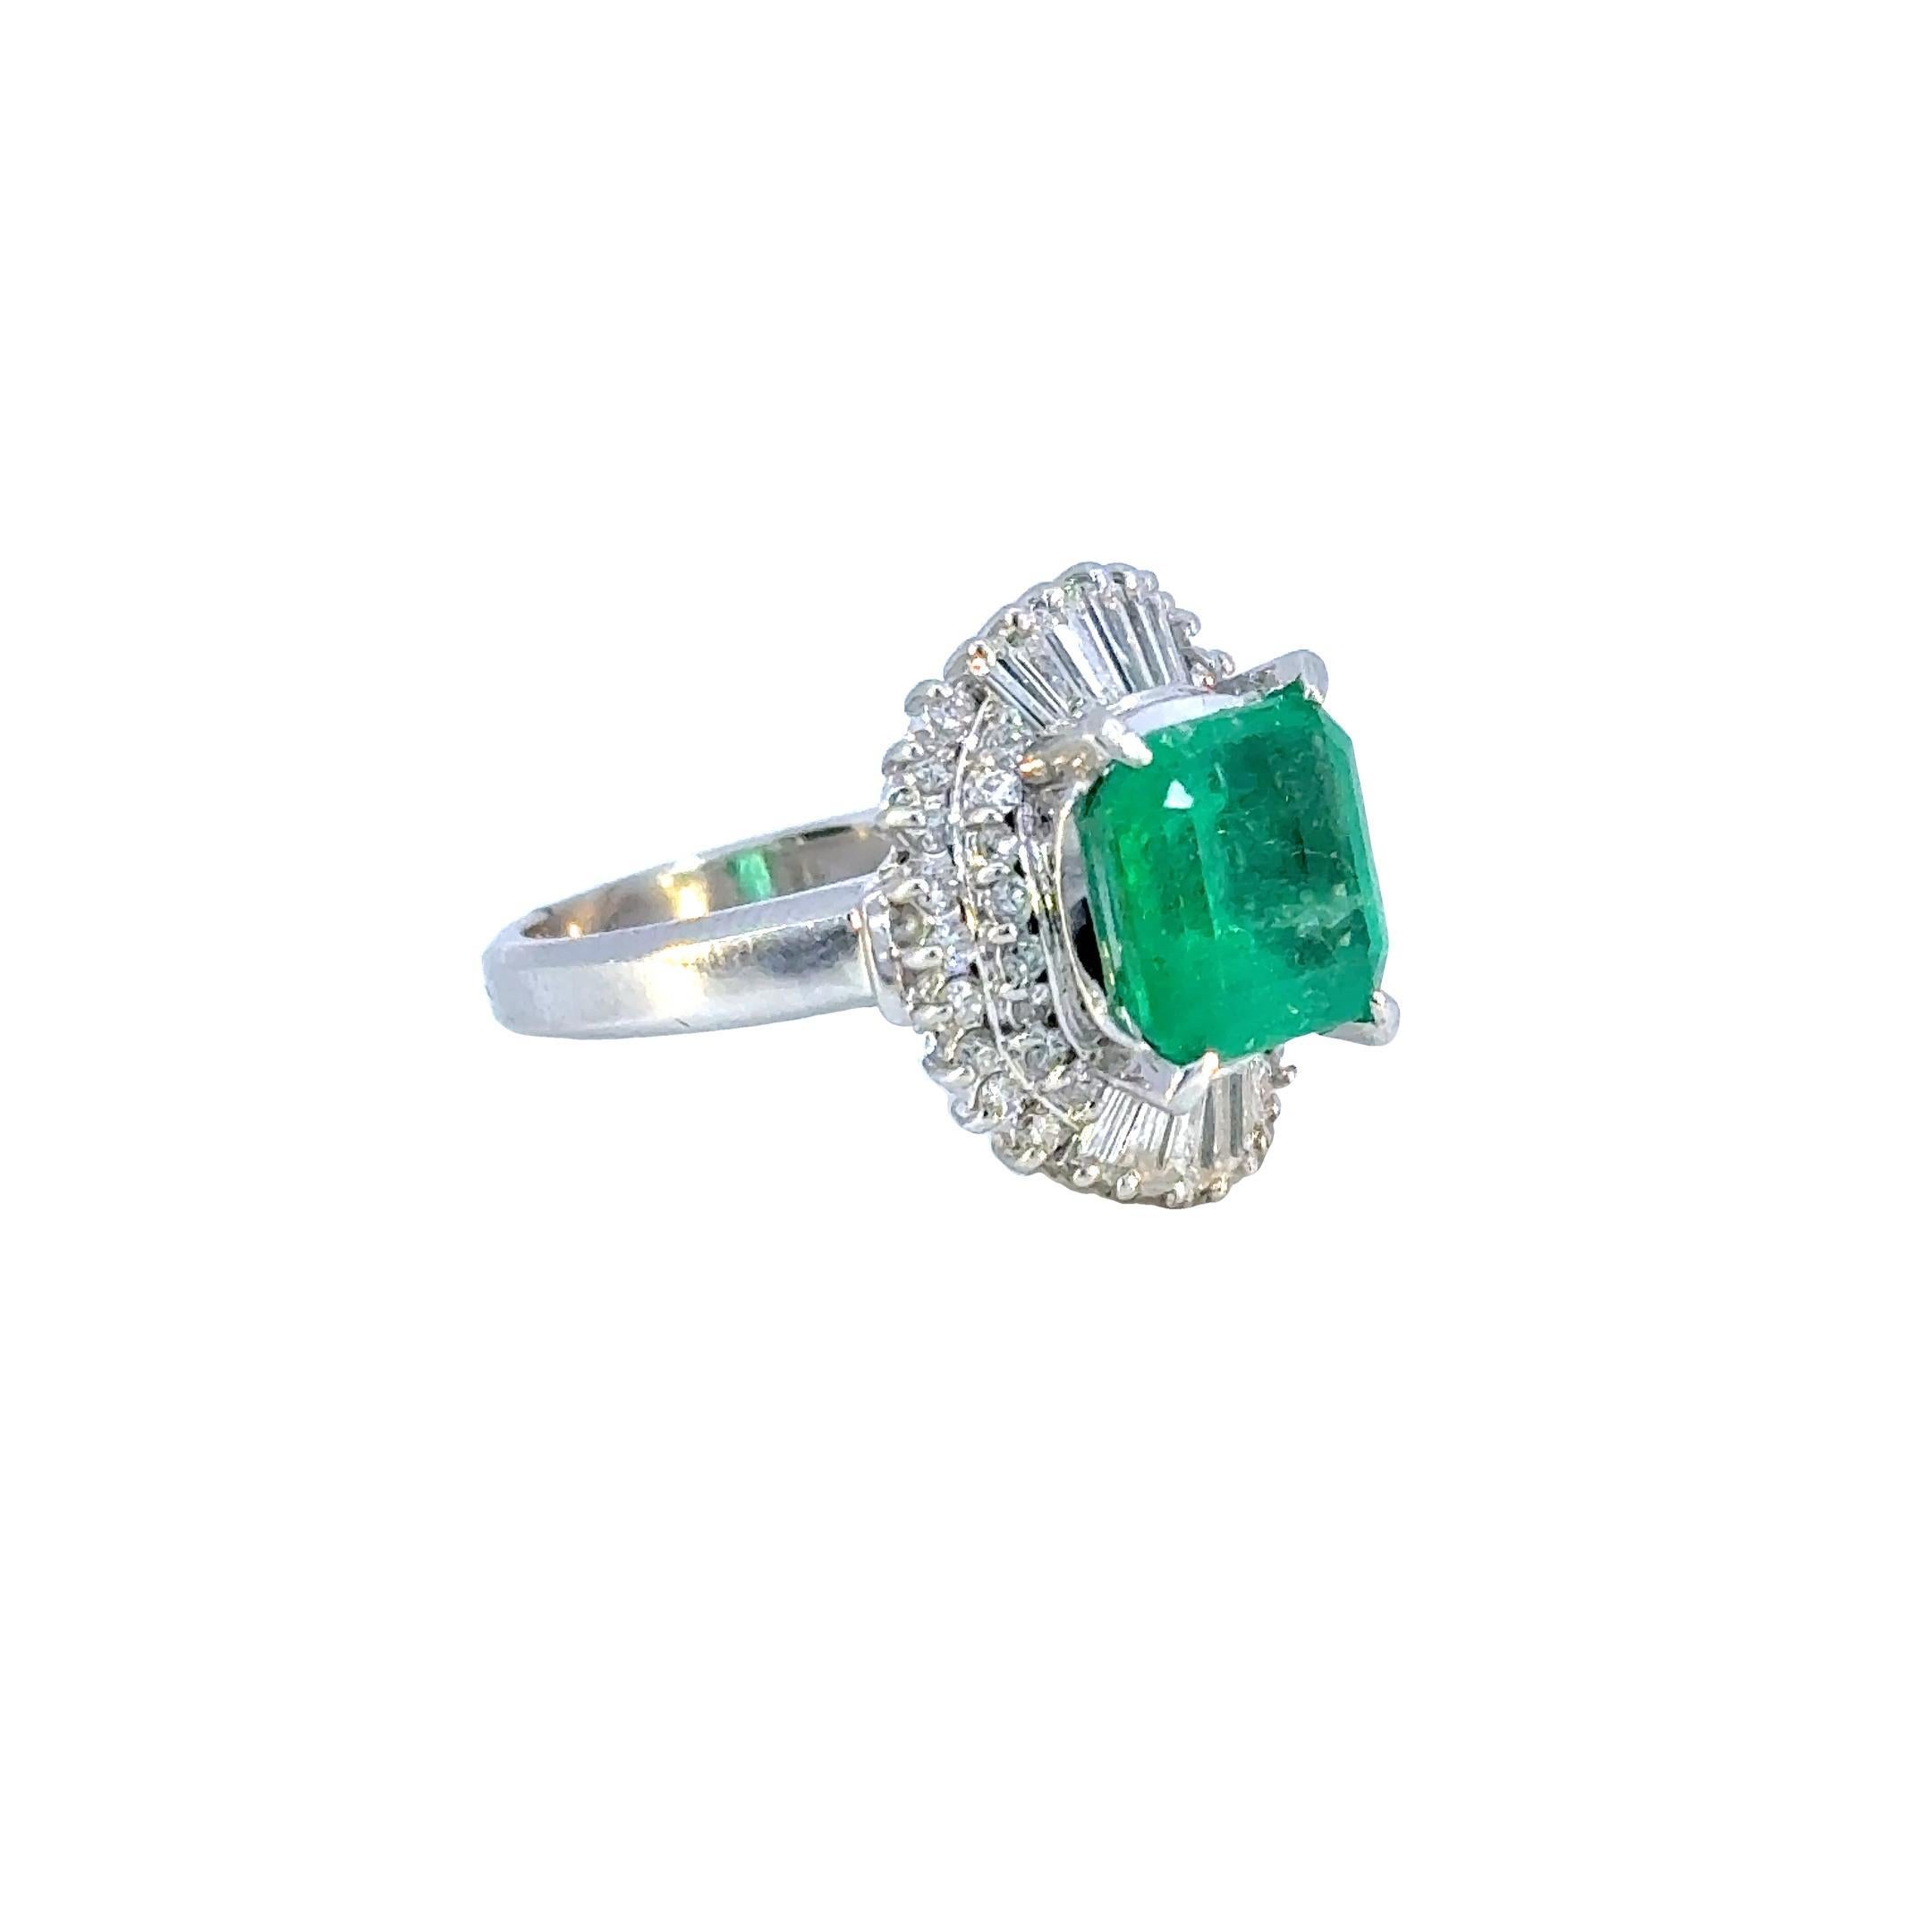 SGL Certified 3.32 Carat Emerald Diamond Platinum Ring In New Condition For Sale In New York, NY